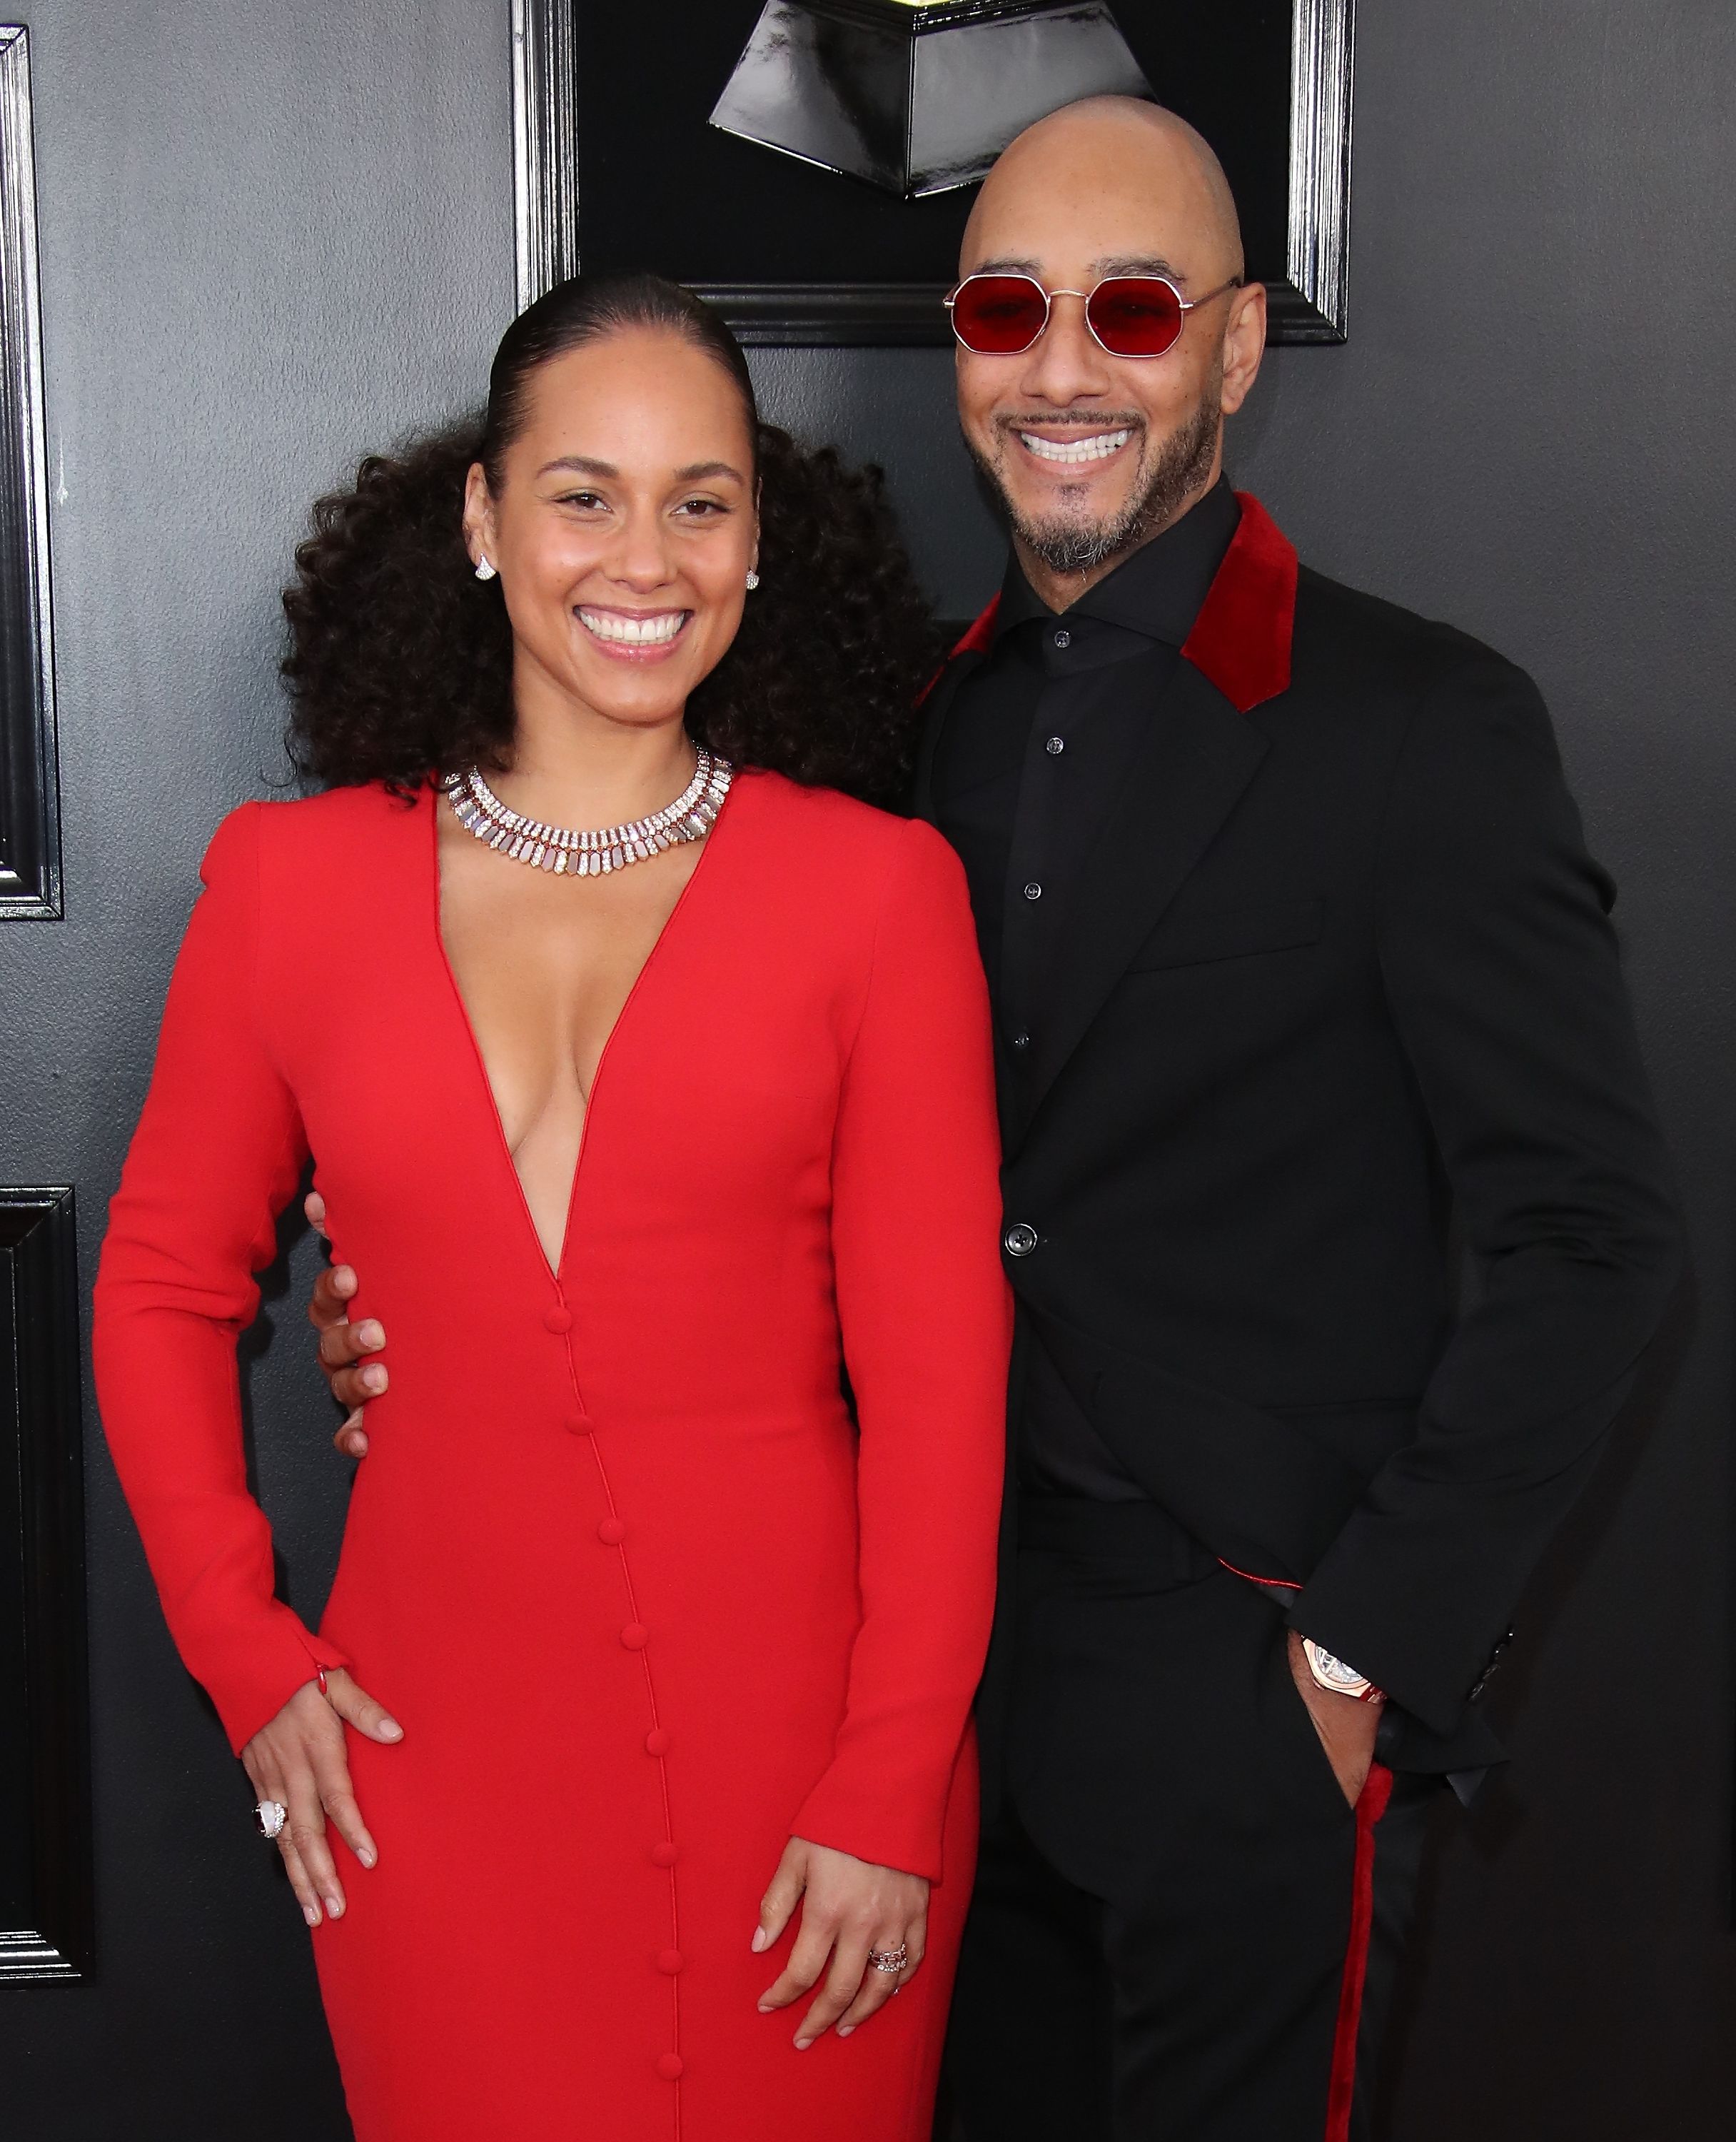 Alicia Keys and Swizz Beatz at the 61st Annual Grammy Awards at Staples Center on February 10, 2019 | Photo: Getty Images